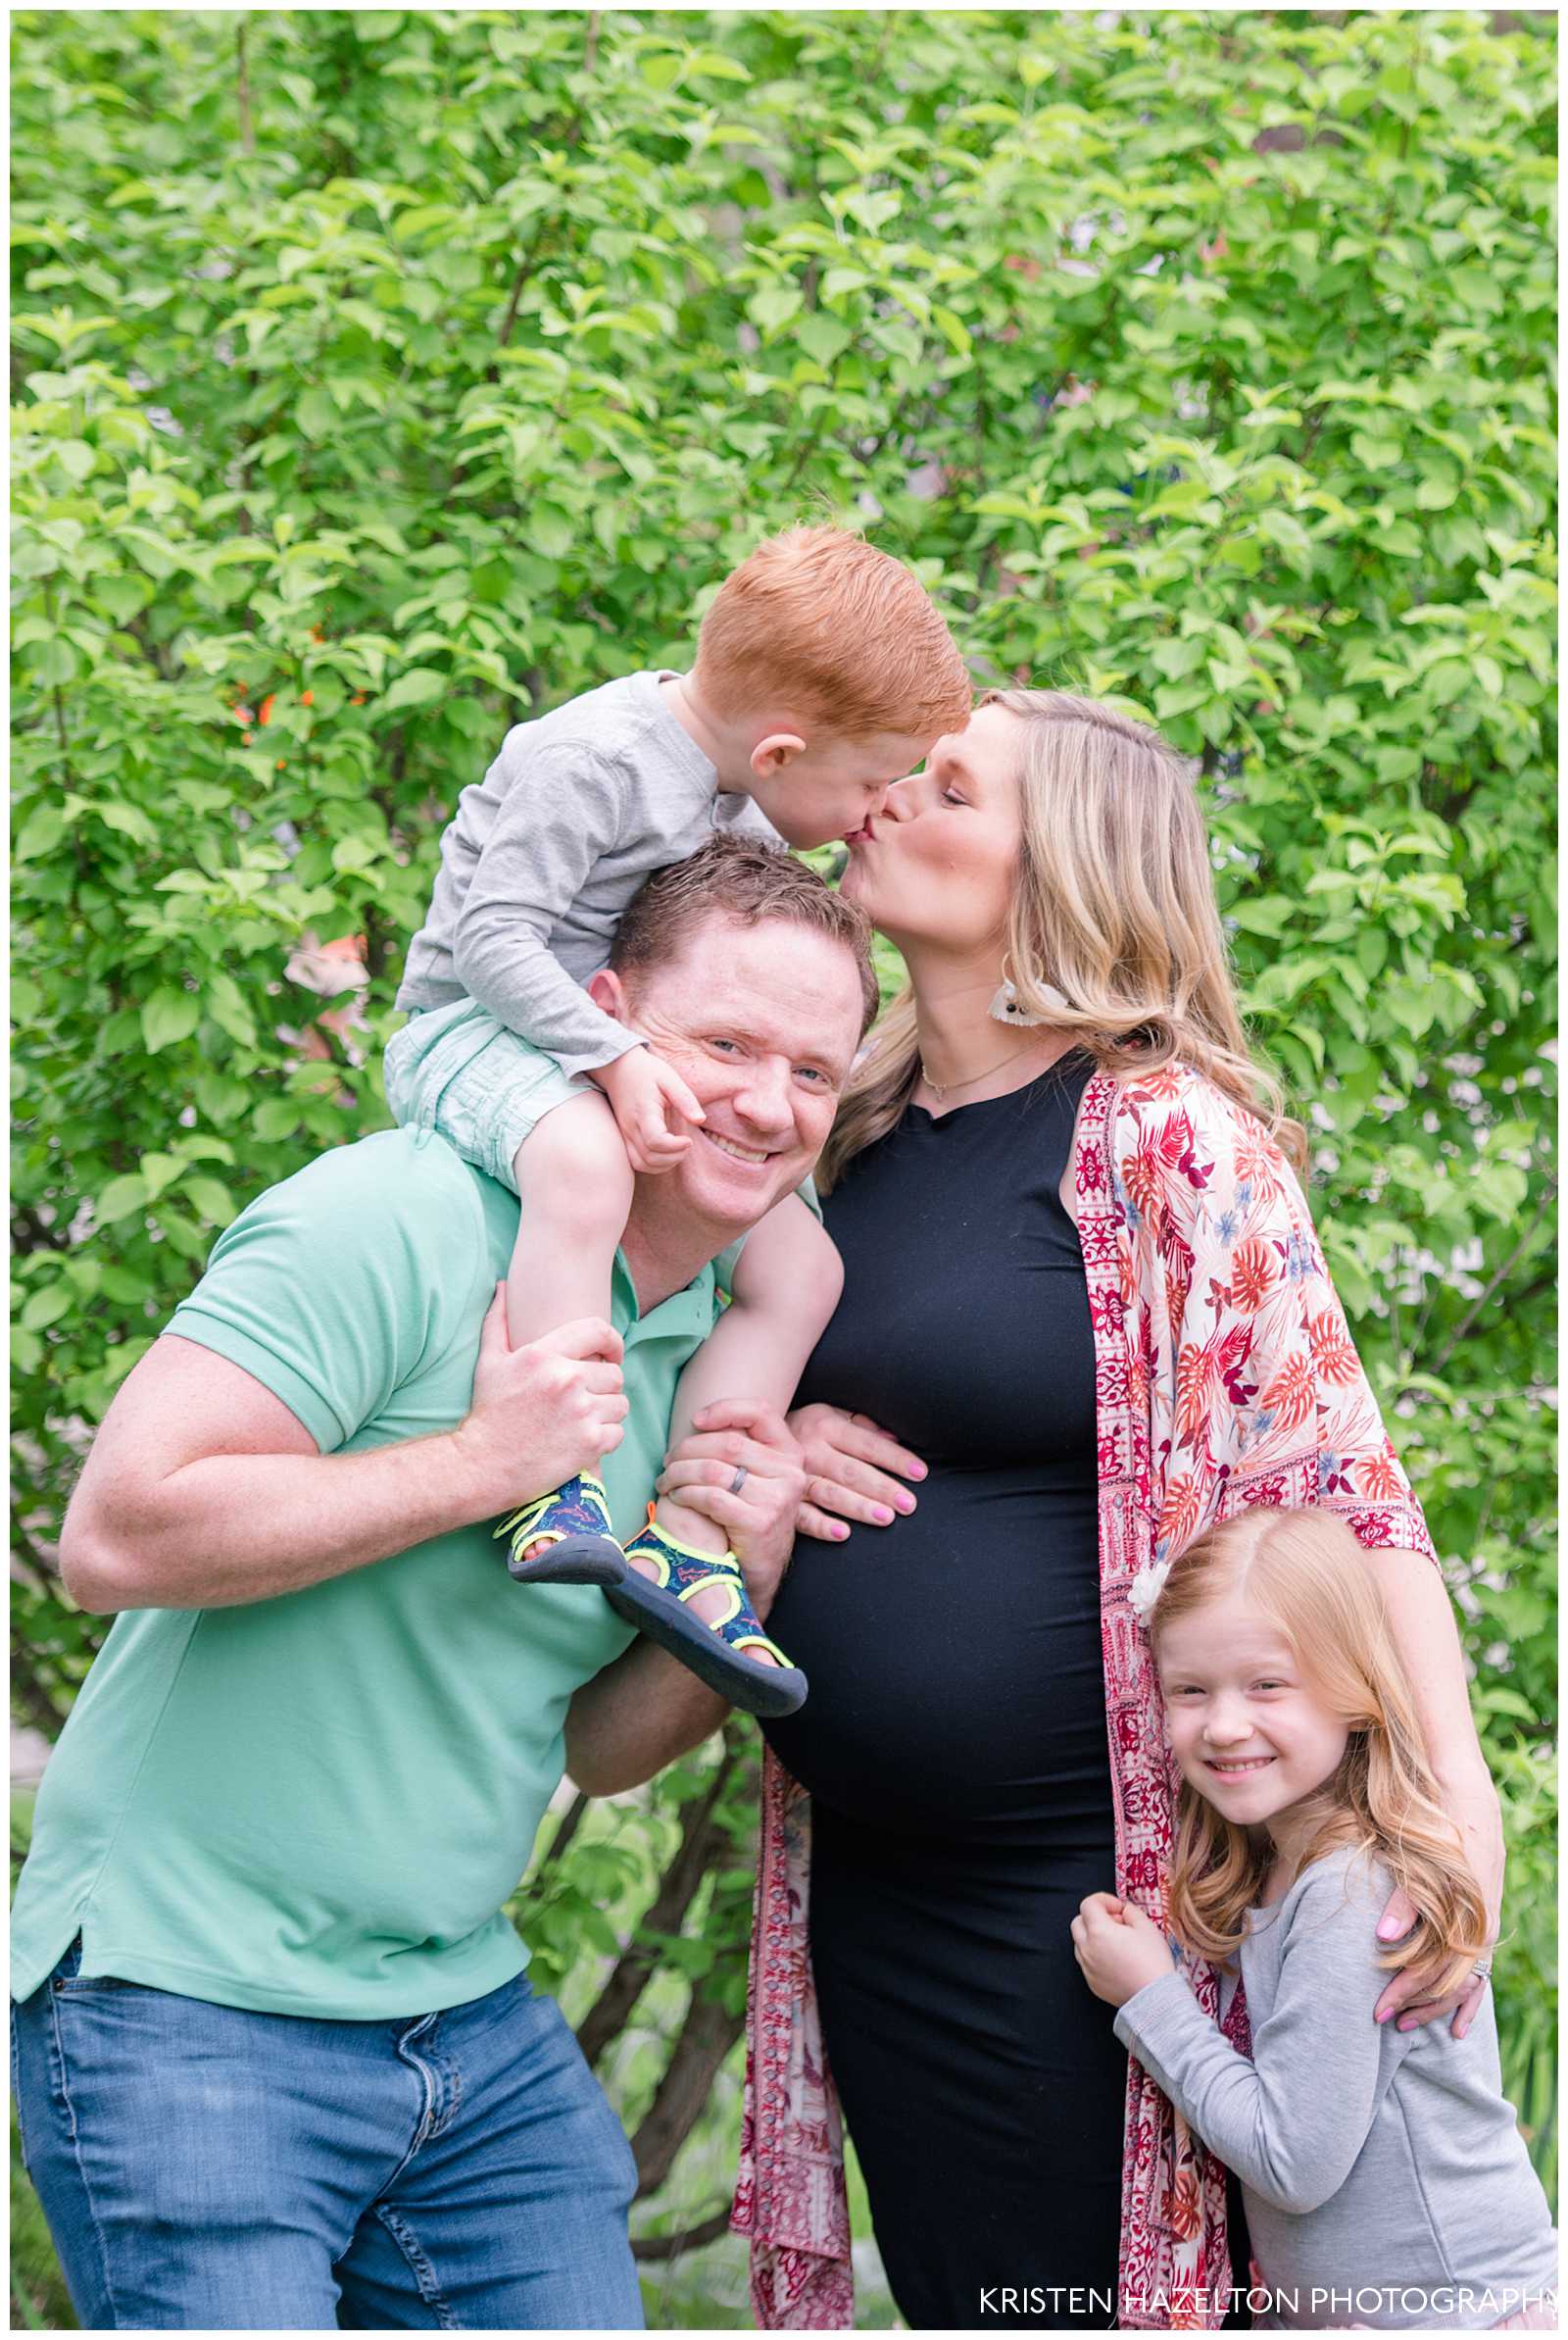 Family-maternity photos at the First United Church of Oak Park